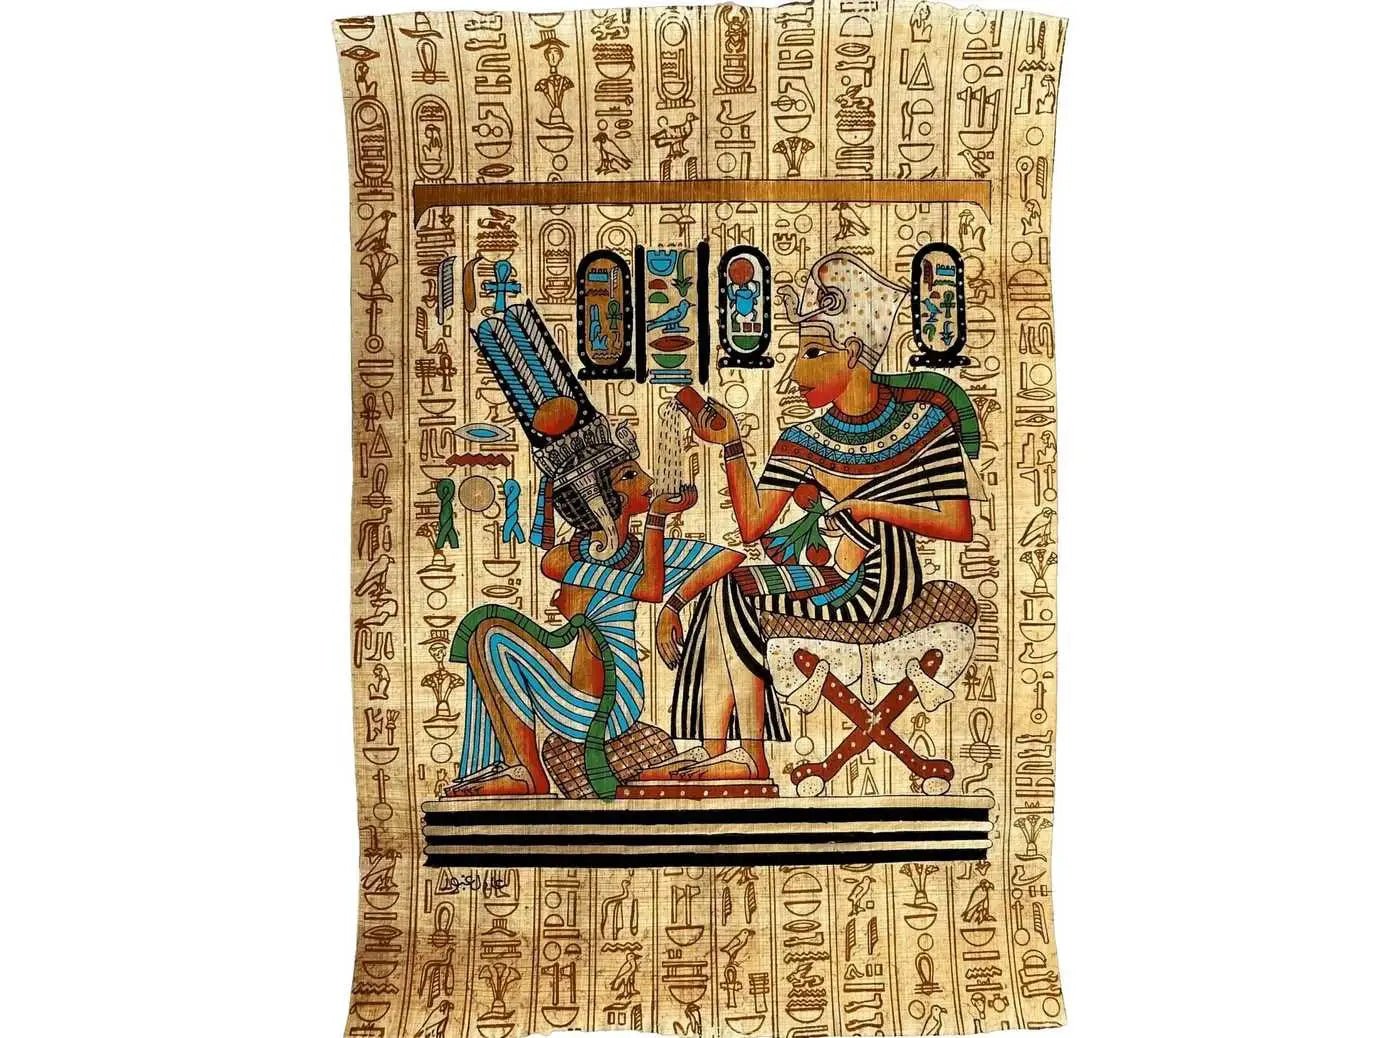 King Tut Pouring Perfume Oil to His Wife Ankhesanamum - Ancient Egyptian Papyrus - Authentic Art of Adel Ghabaour - Handmade in Egypt